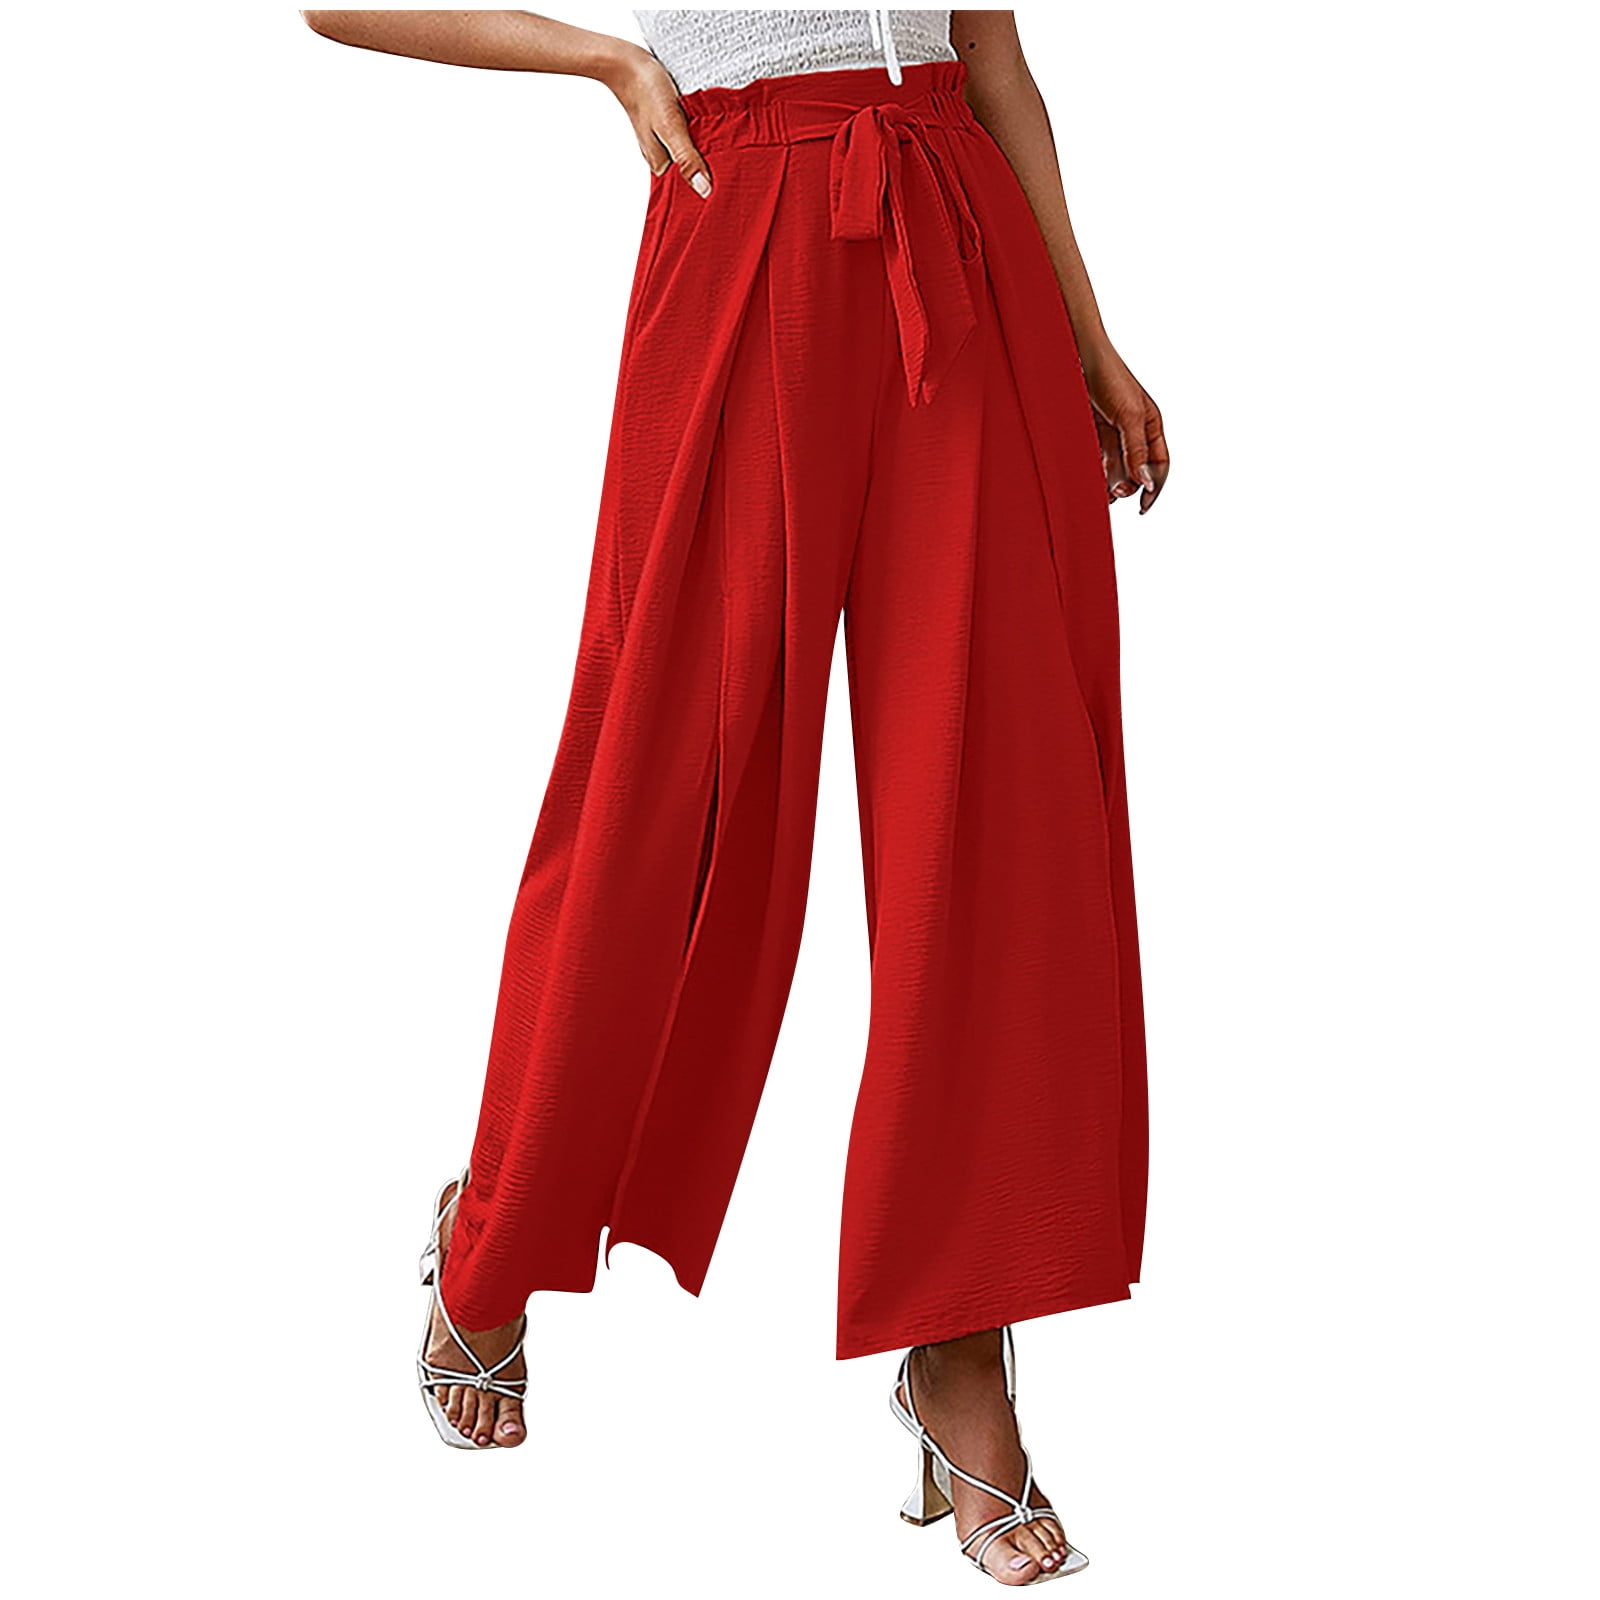 High-waisted Red Pants Elegant Palazzo Pants. Wide Leg Pants, Pants Skirt,  Elegant Trousers, Trousers With Pockets, Evening Pants - Etsy